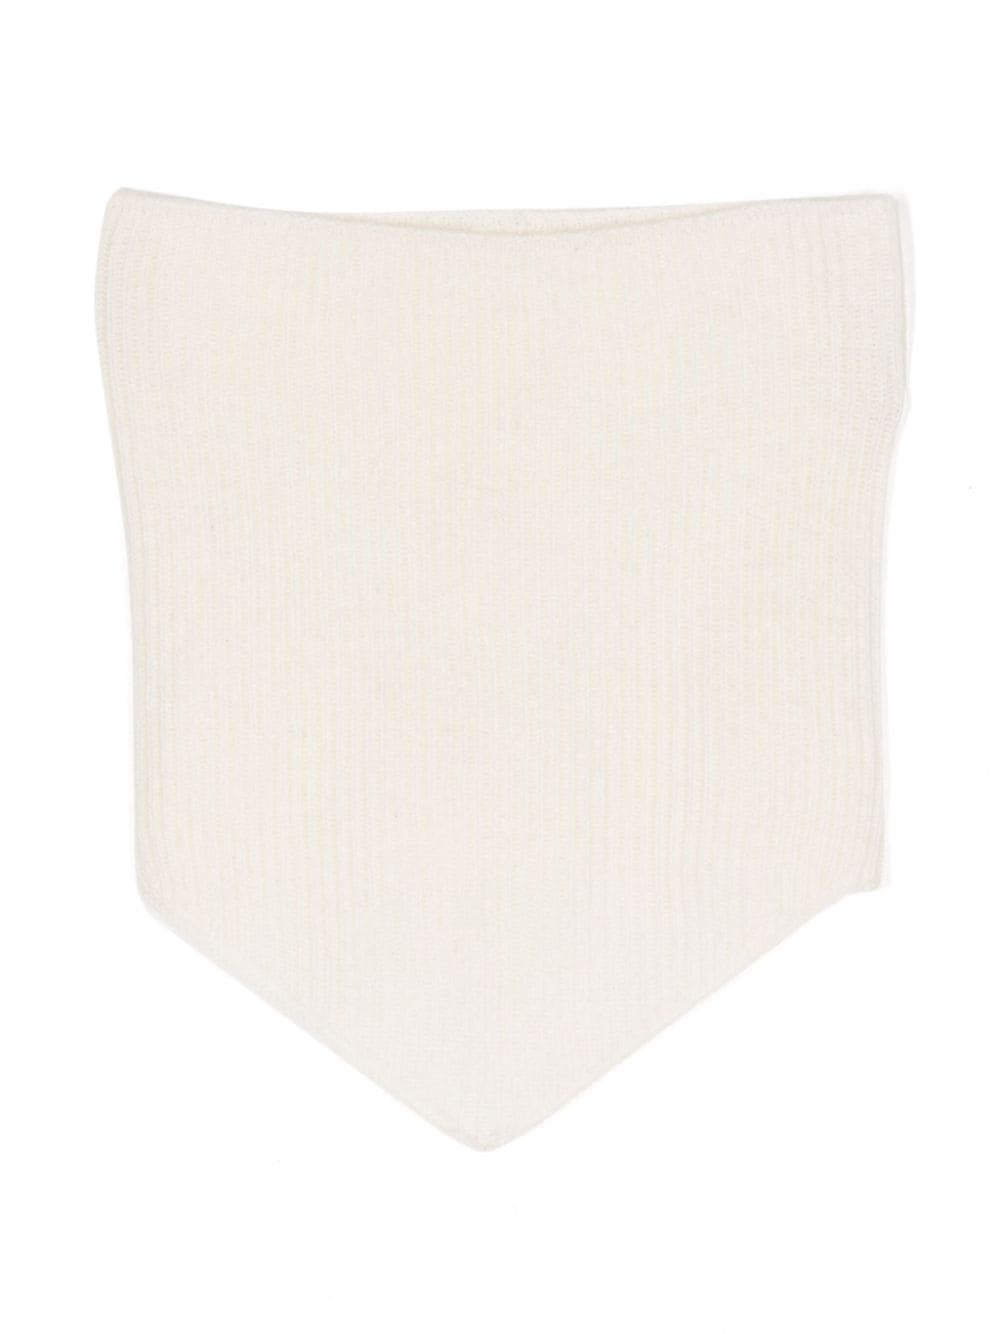 Cashmere In Love Babies' Leysin Bandana-style Cashmere Scarf In White